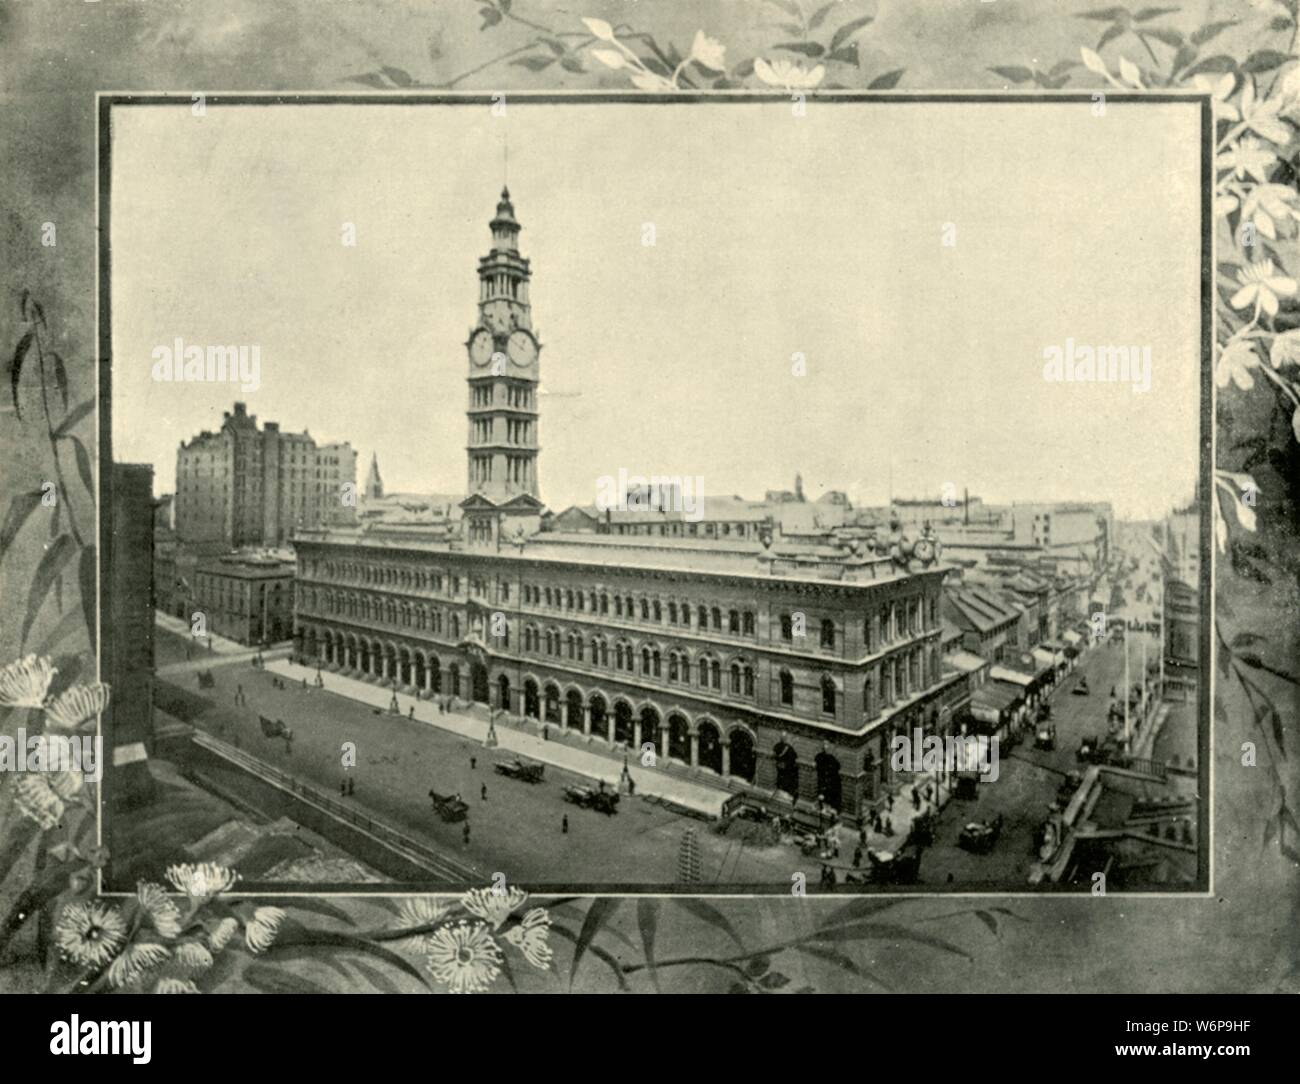 'General Post Office, Sydney', 1901. Landmark building on Martin Place, Sydney, New South Wales, constructed from 1866, designed under guidance of Architect James Barnet in  Victorian Renaissance Style. From &quot;Federated Australia&quot;. [The Werner Company, London, 1901] Stock Photo